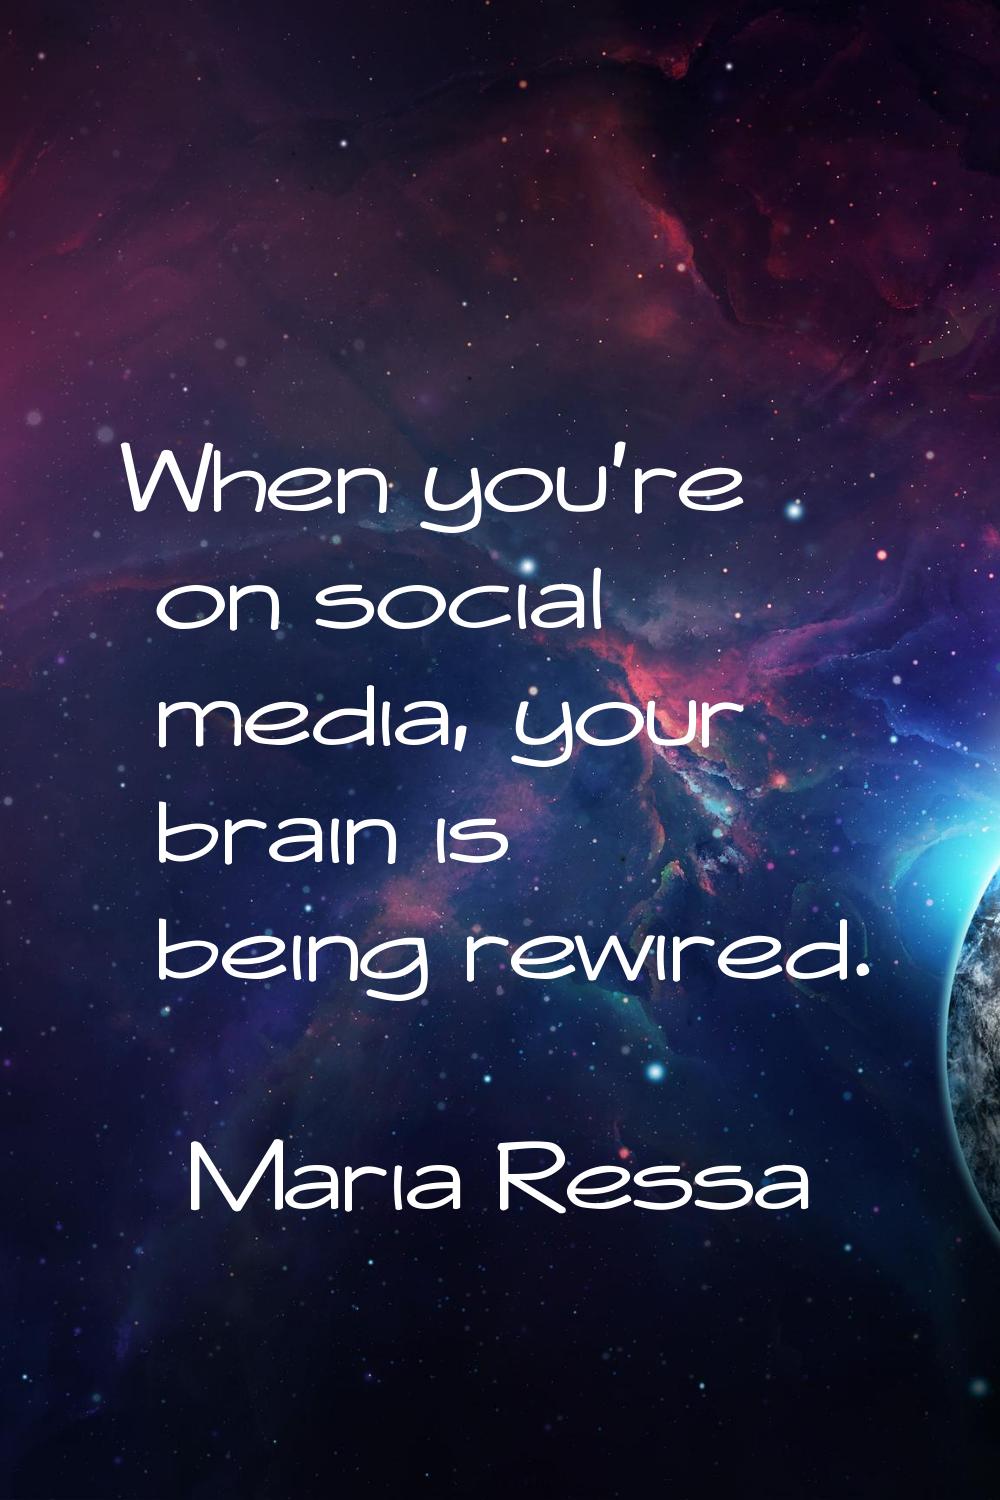 When you're on social media, your brain is being rewired.